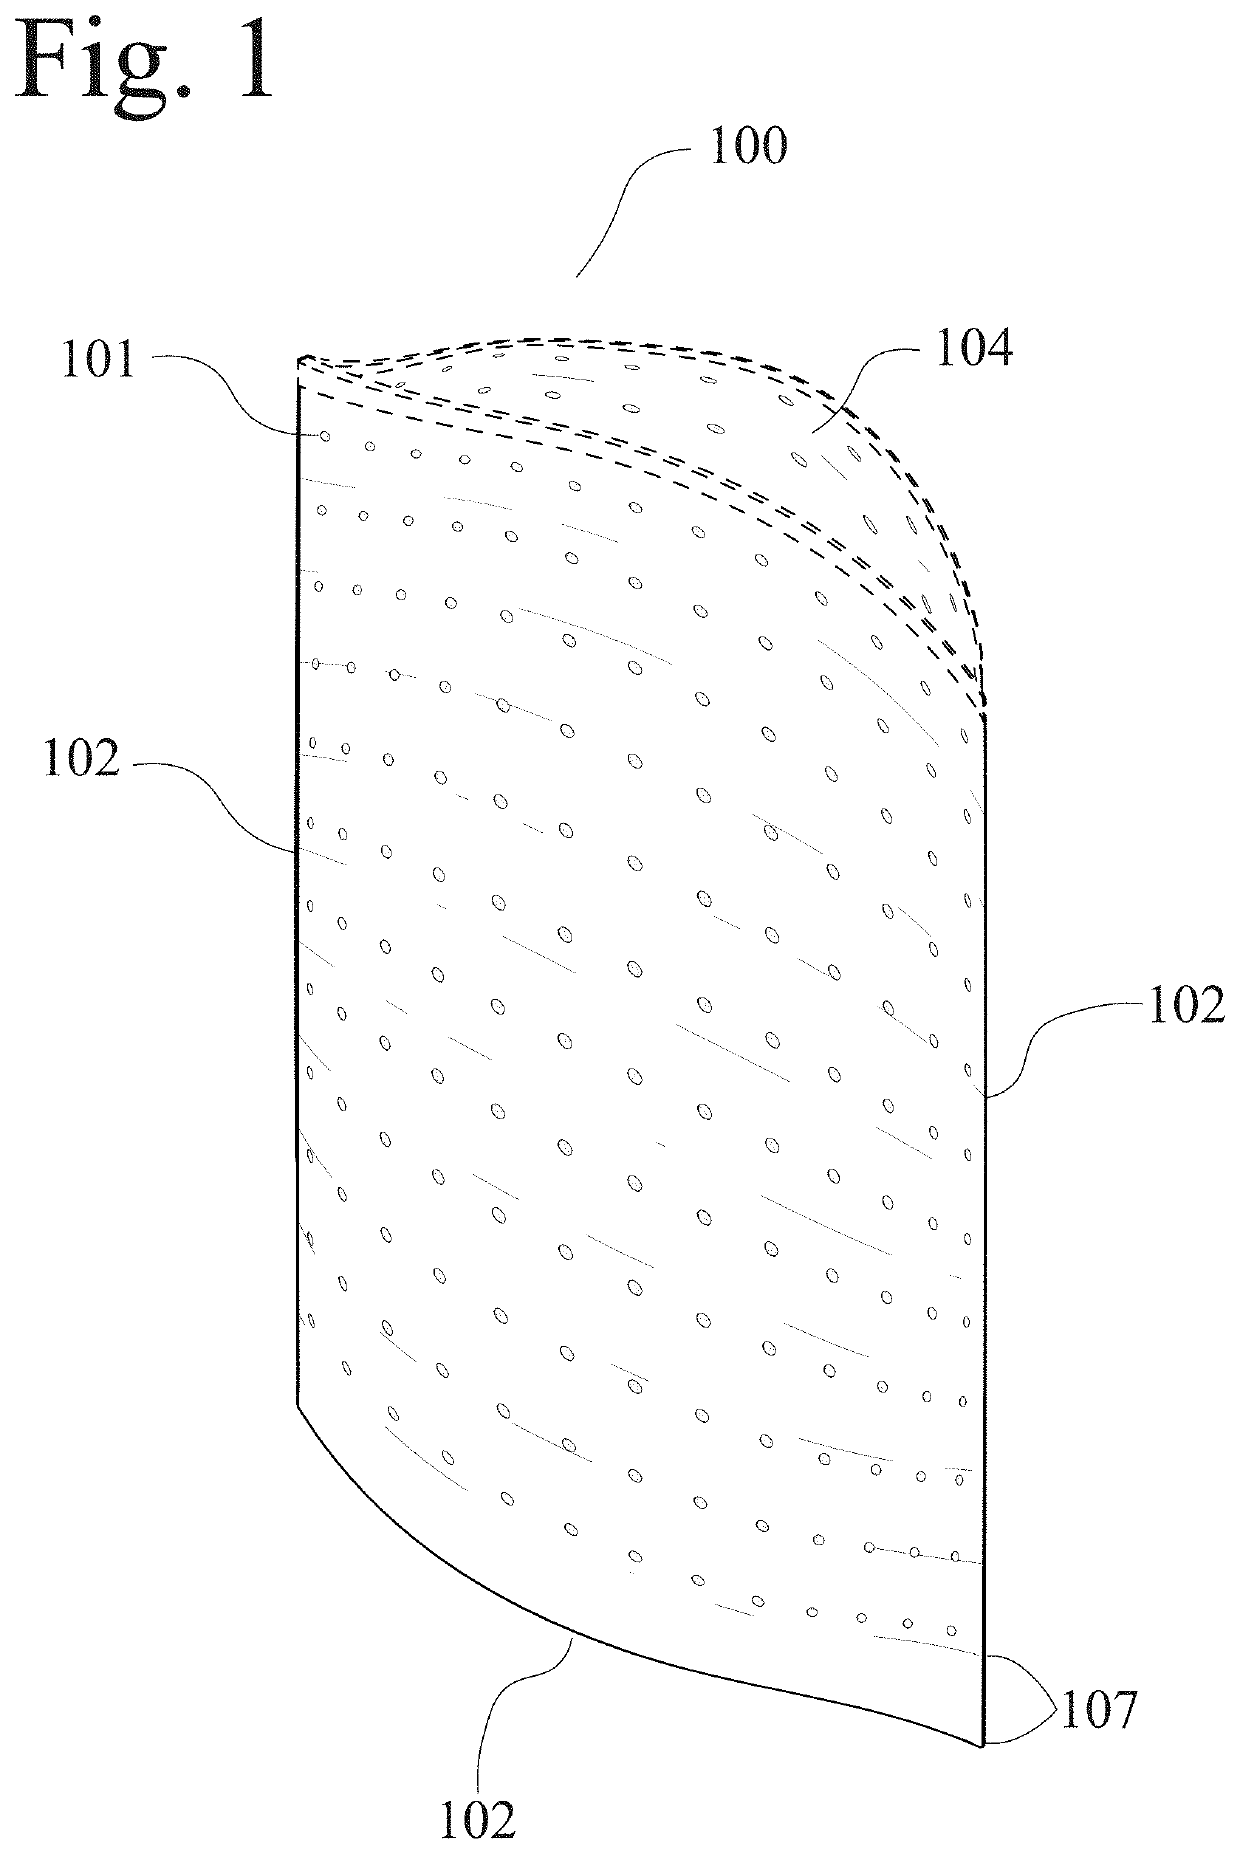 Perforated refuse bag and related methods